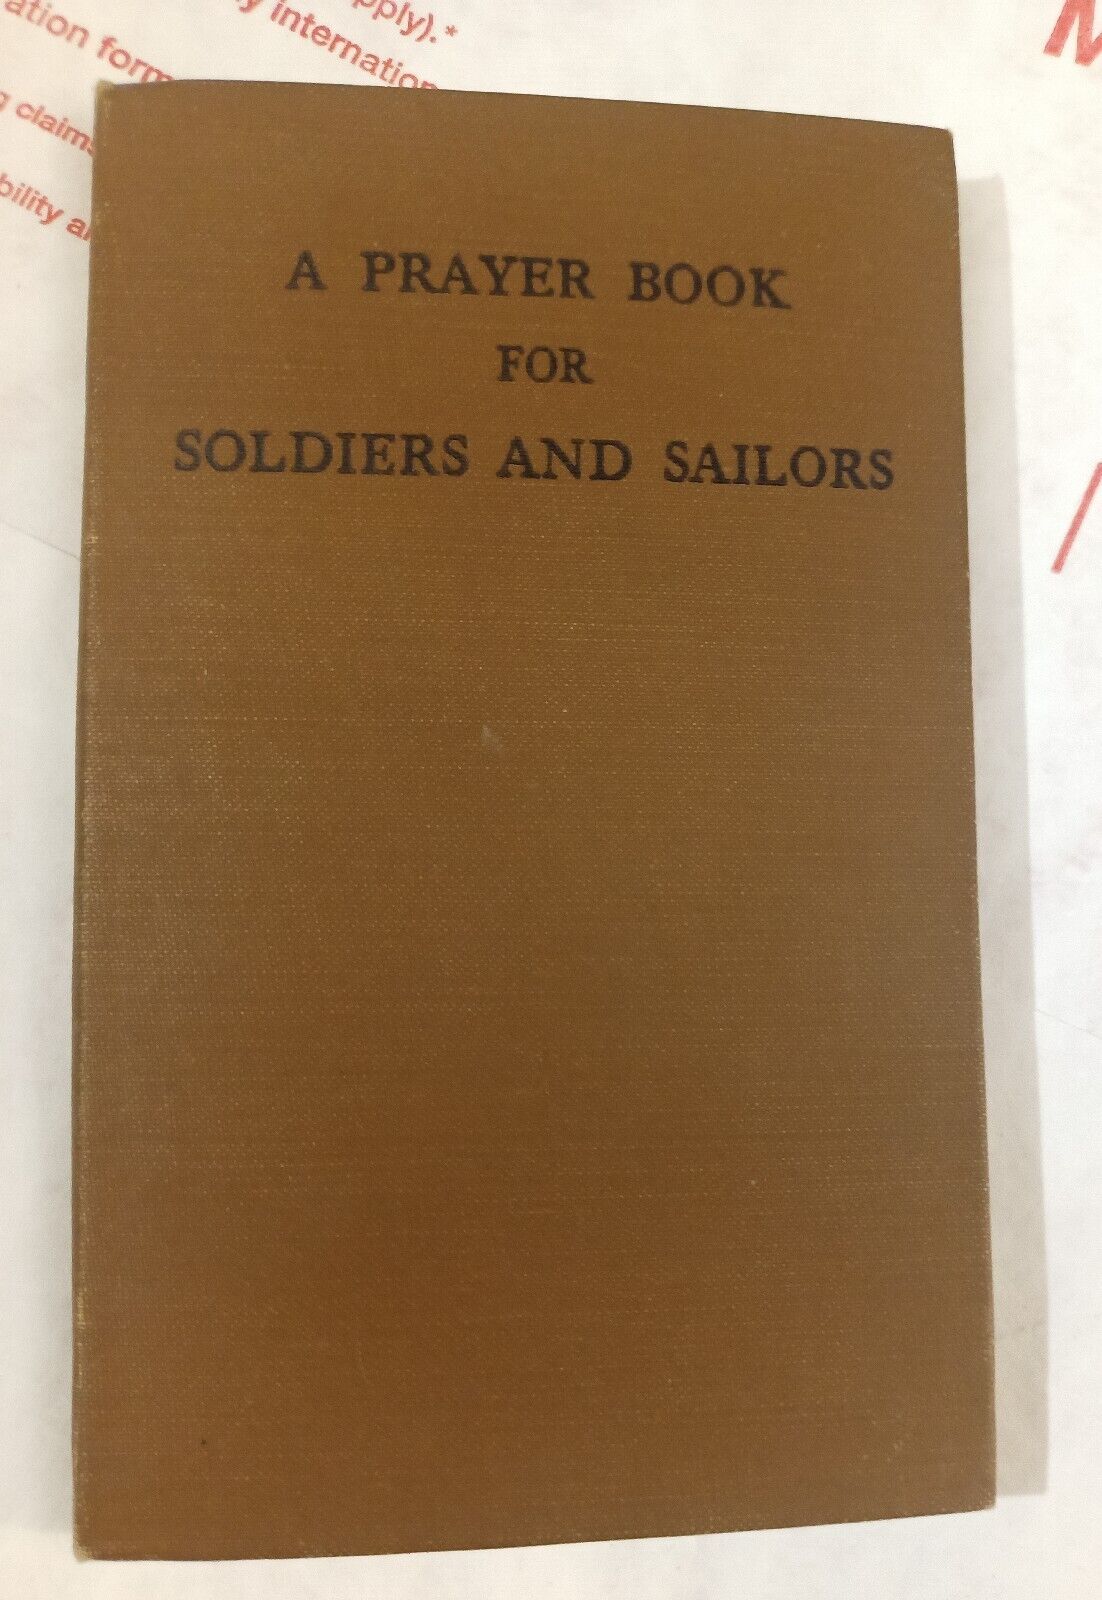 A PRAYER BOOK FOR SOLDIERS AND SAILORS 1941 WWII 🪖 Inscribed 2nd Edition